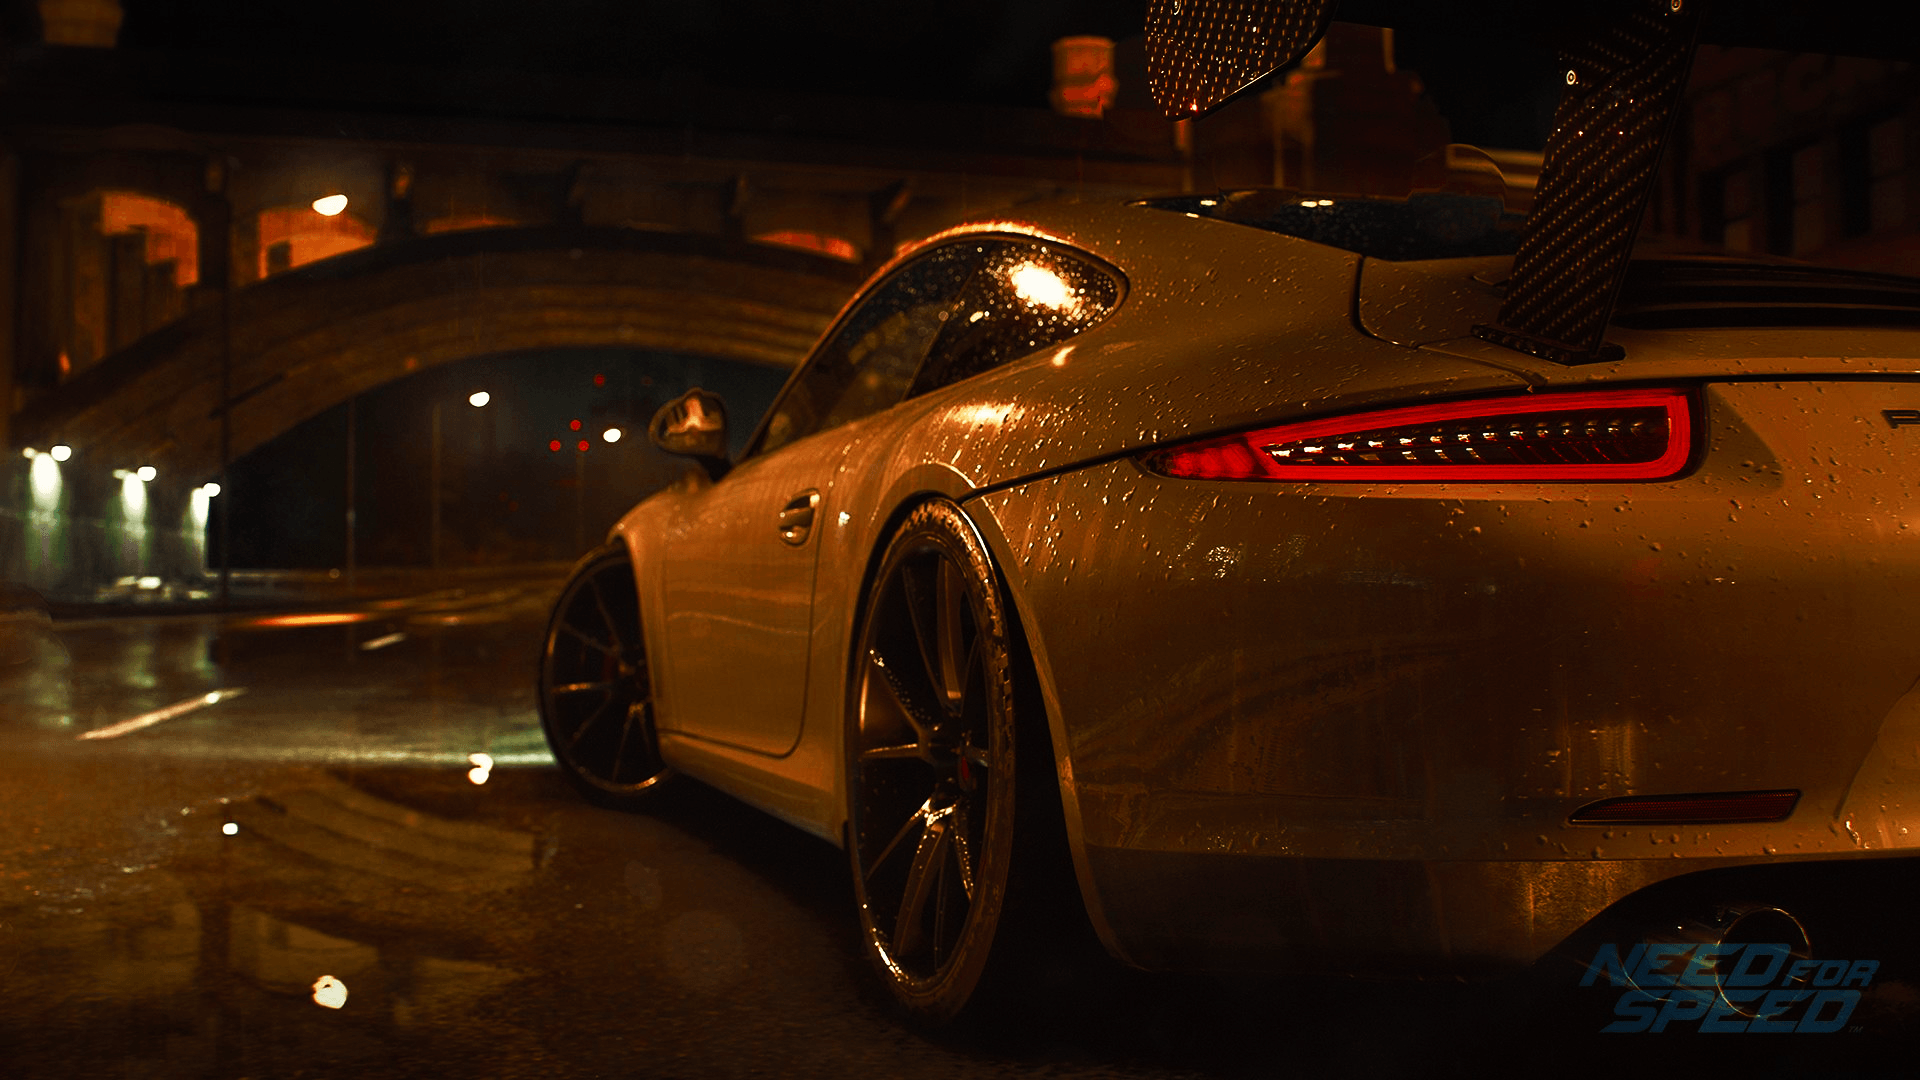 Need For Speed (2015) Wallpaper, Picture, Image